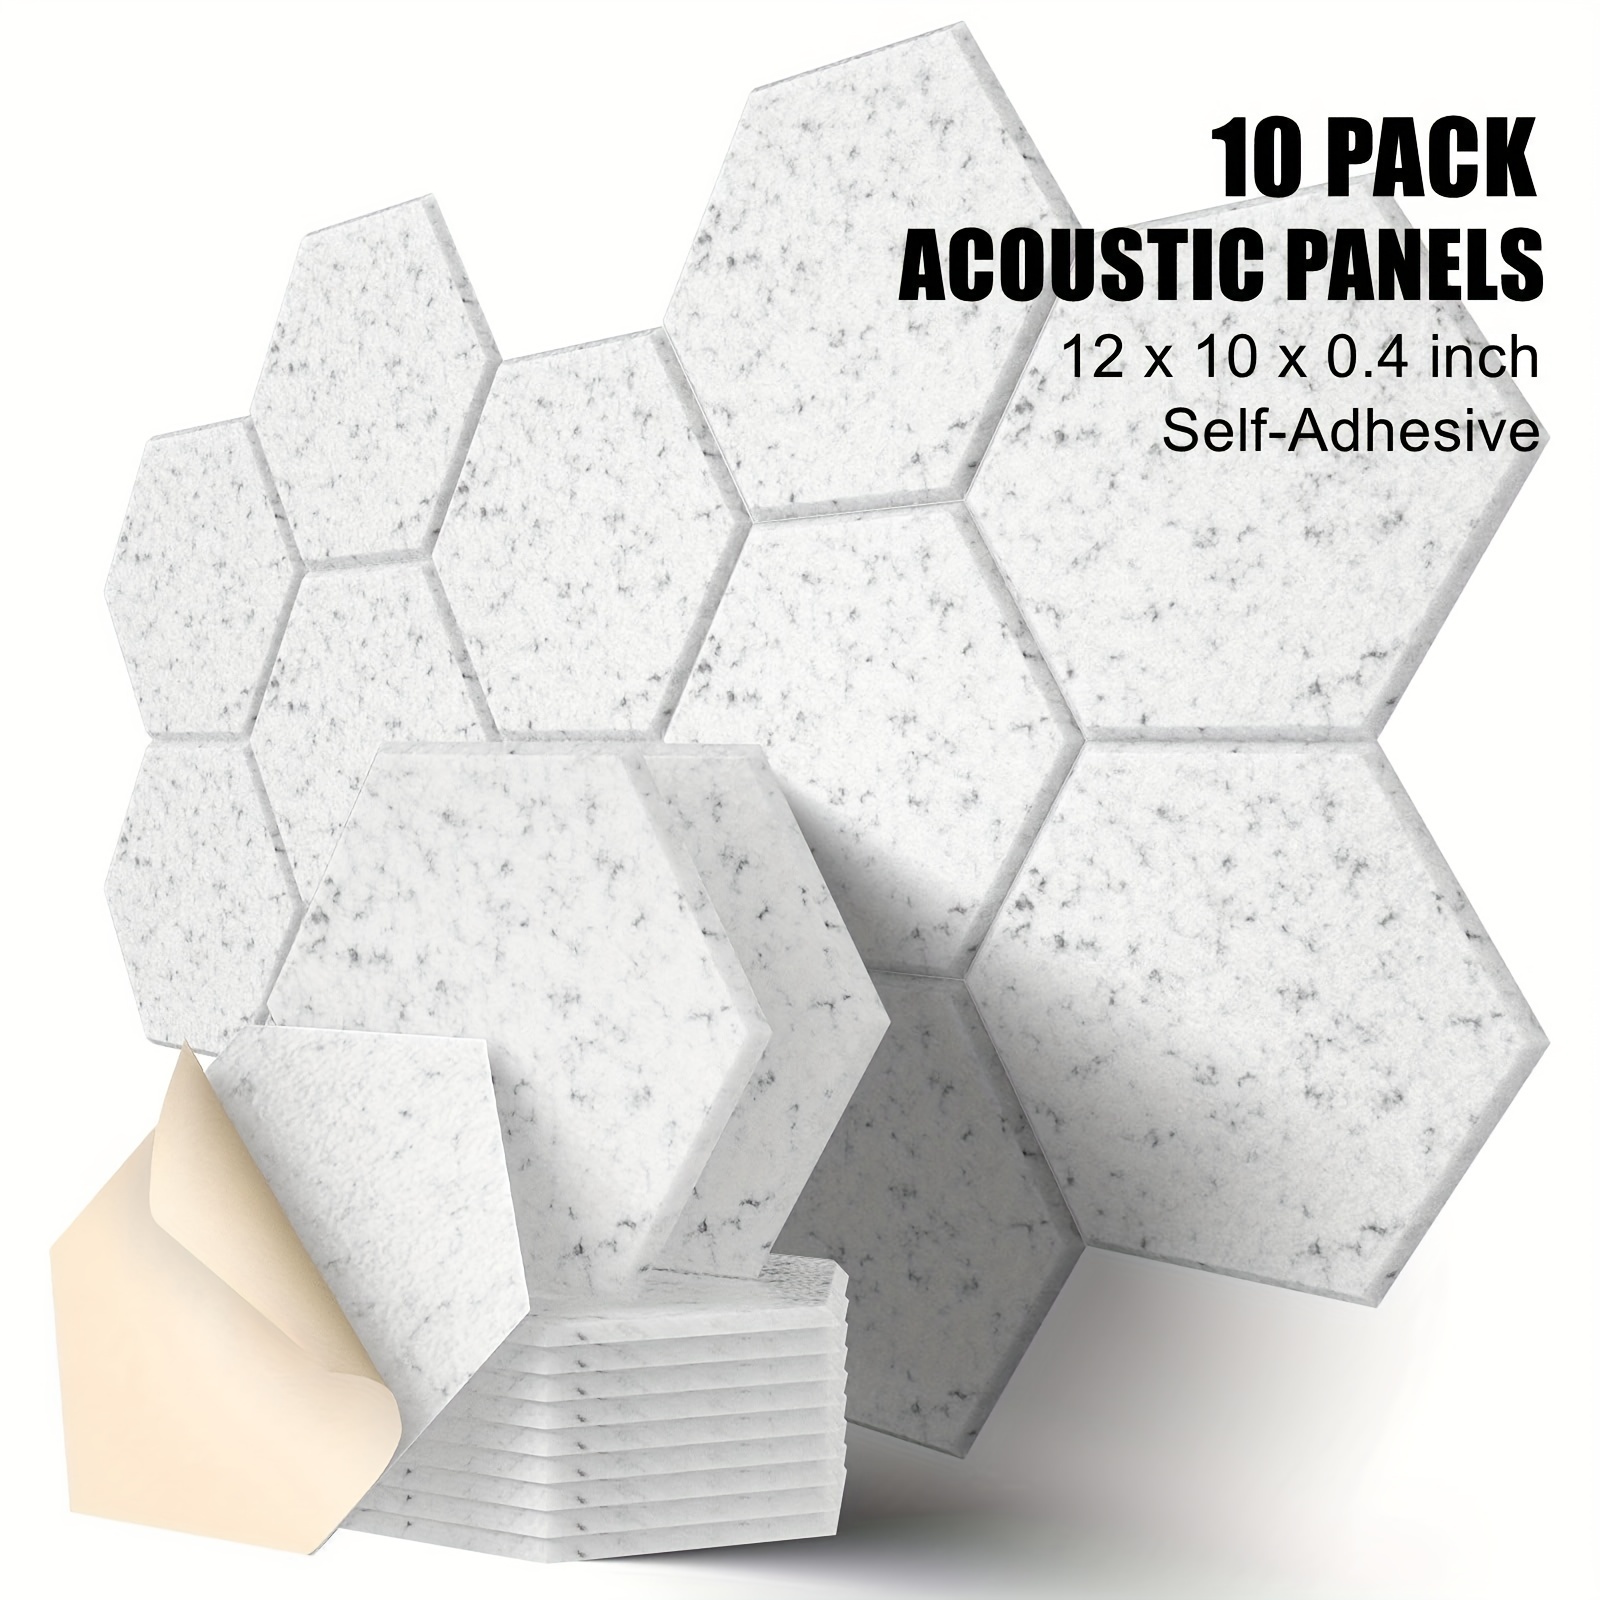 Sound Proof Foam Panels 24pcs, 12 x 12 x 2 inches Sound Absorbing Foam, Acoustic  Foam with Self-Adhesive, Mushroom Padding Tiles for Music Studio Gameroom  Bedroom 